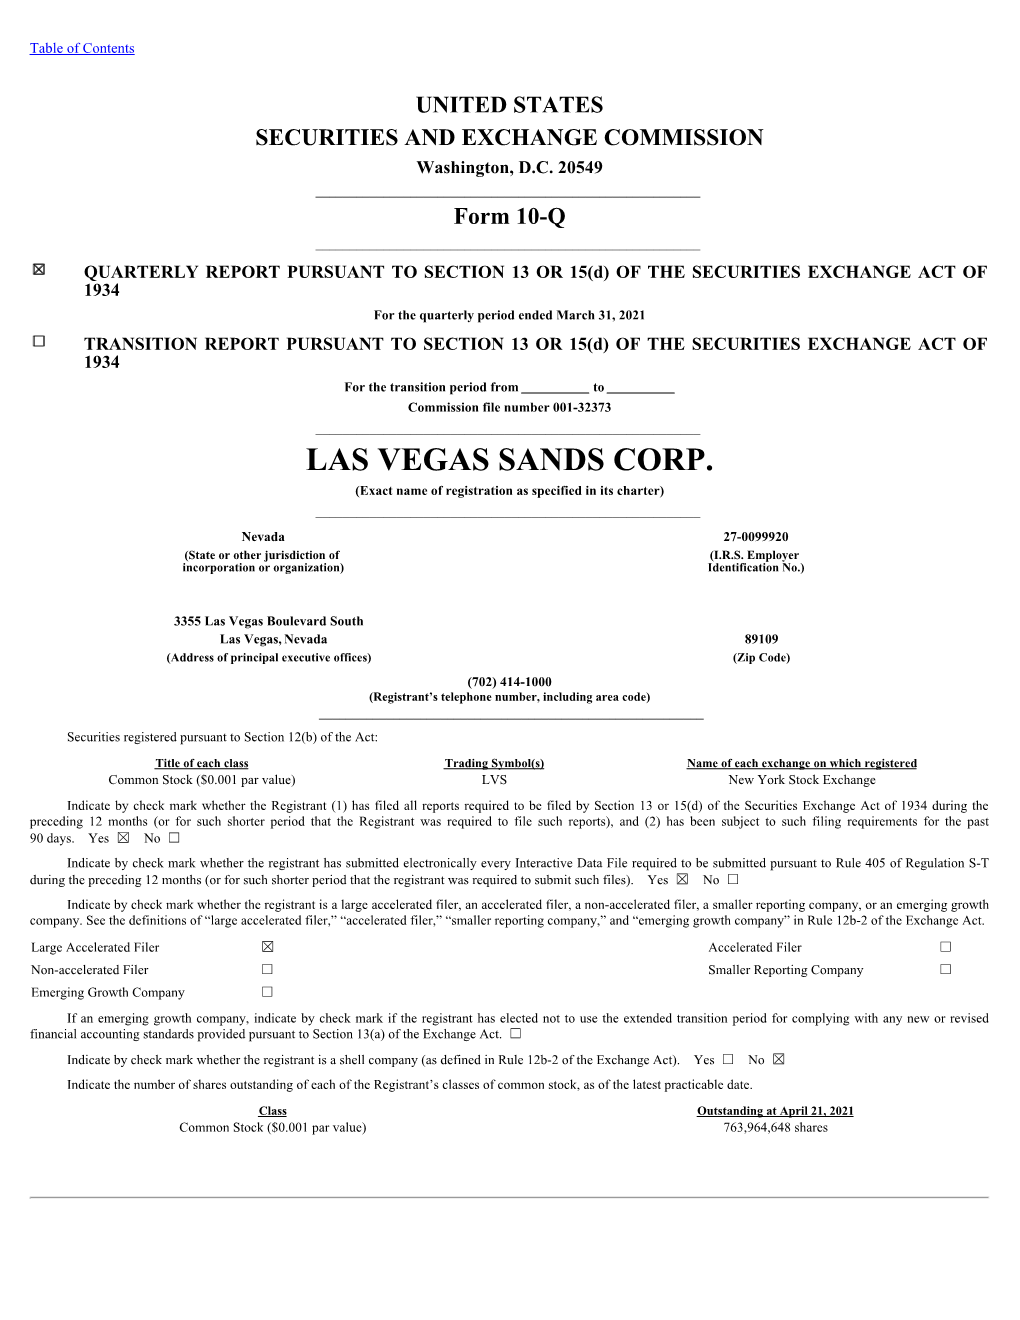 LAS VEGAS SANDS CORP. (Exact Name of Registration As Specified in Its Charter) ______Nevada 27-0099920 (State Or Other Jurisdiction of (I.R.S